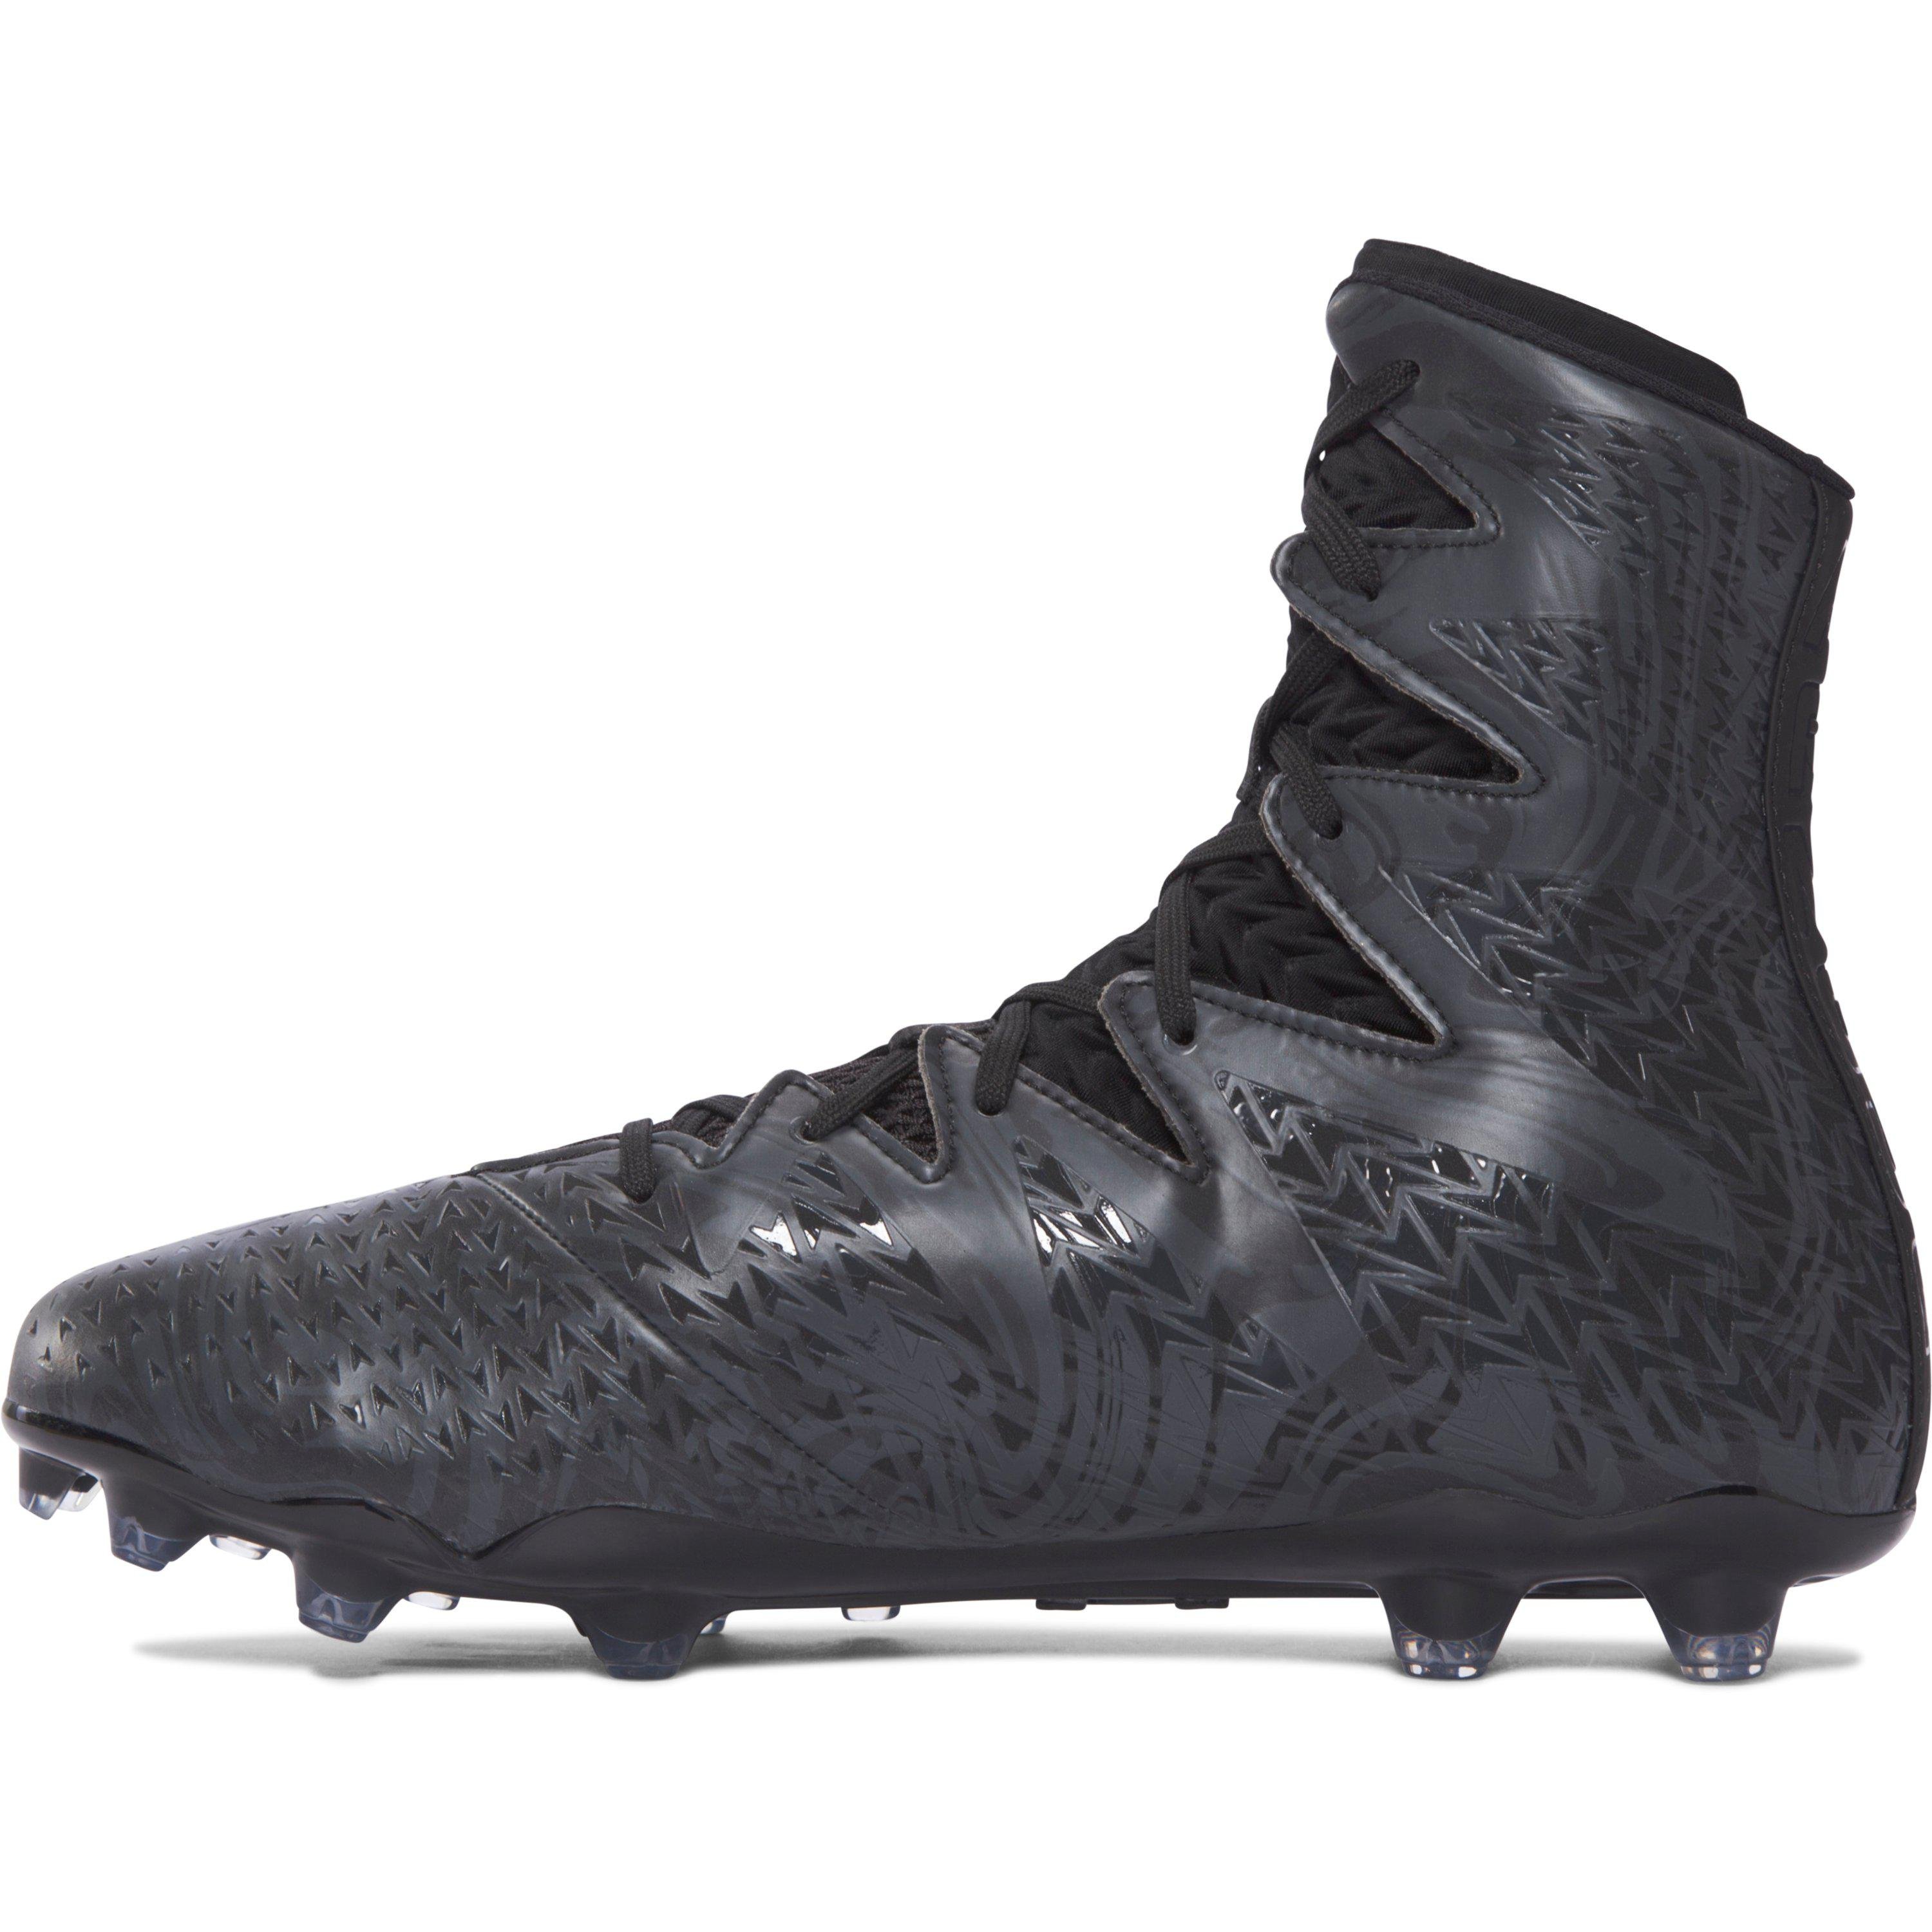 Under Armour Mens Highlight RM Football Cleats Black Size 8.5 M US